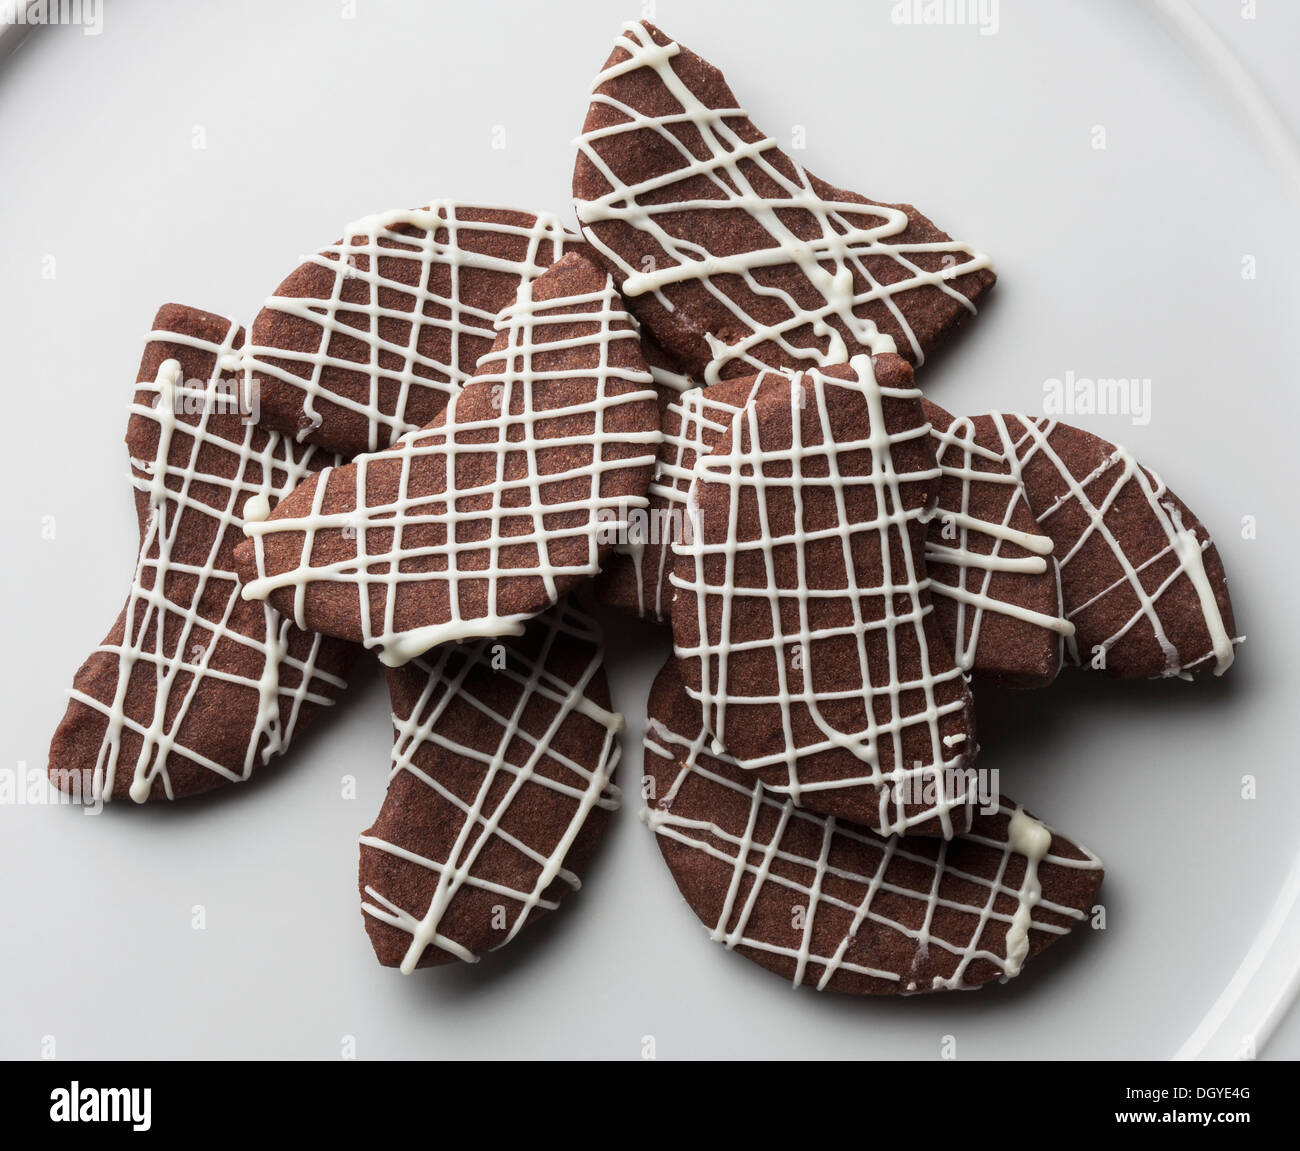 Chocolate cookies with icing drizzle Stock Photo